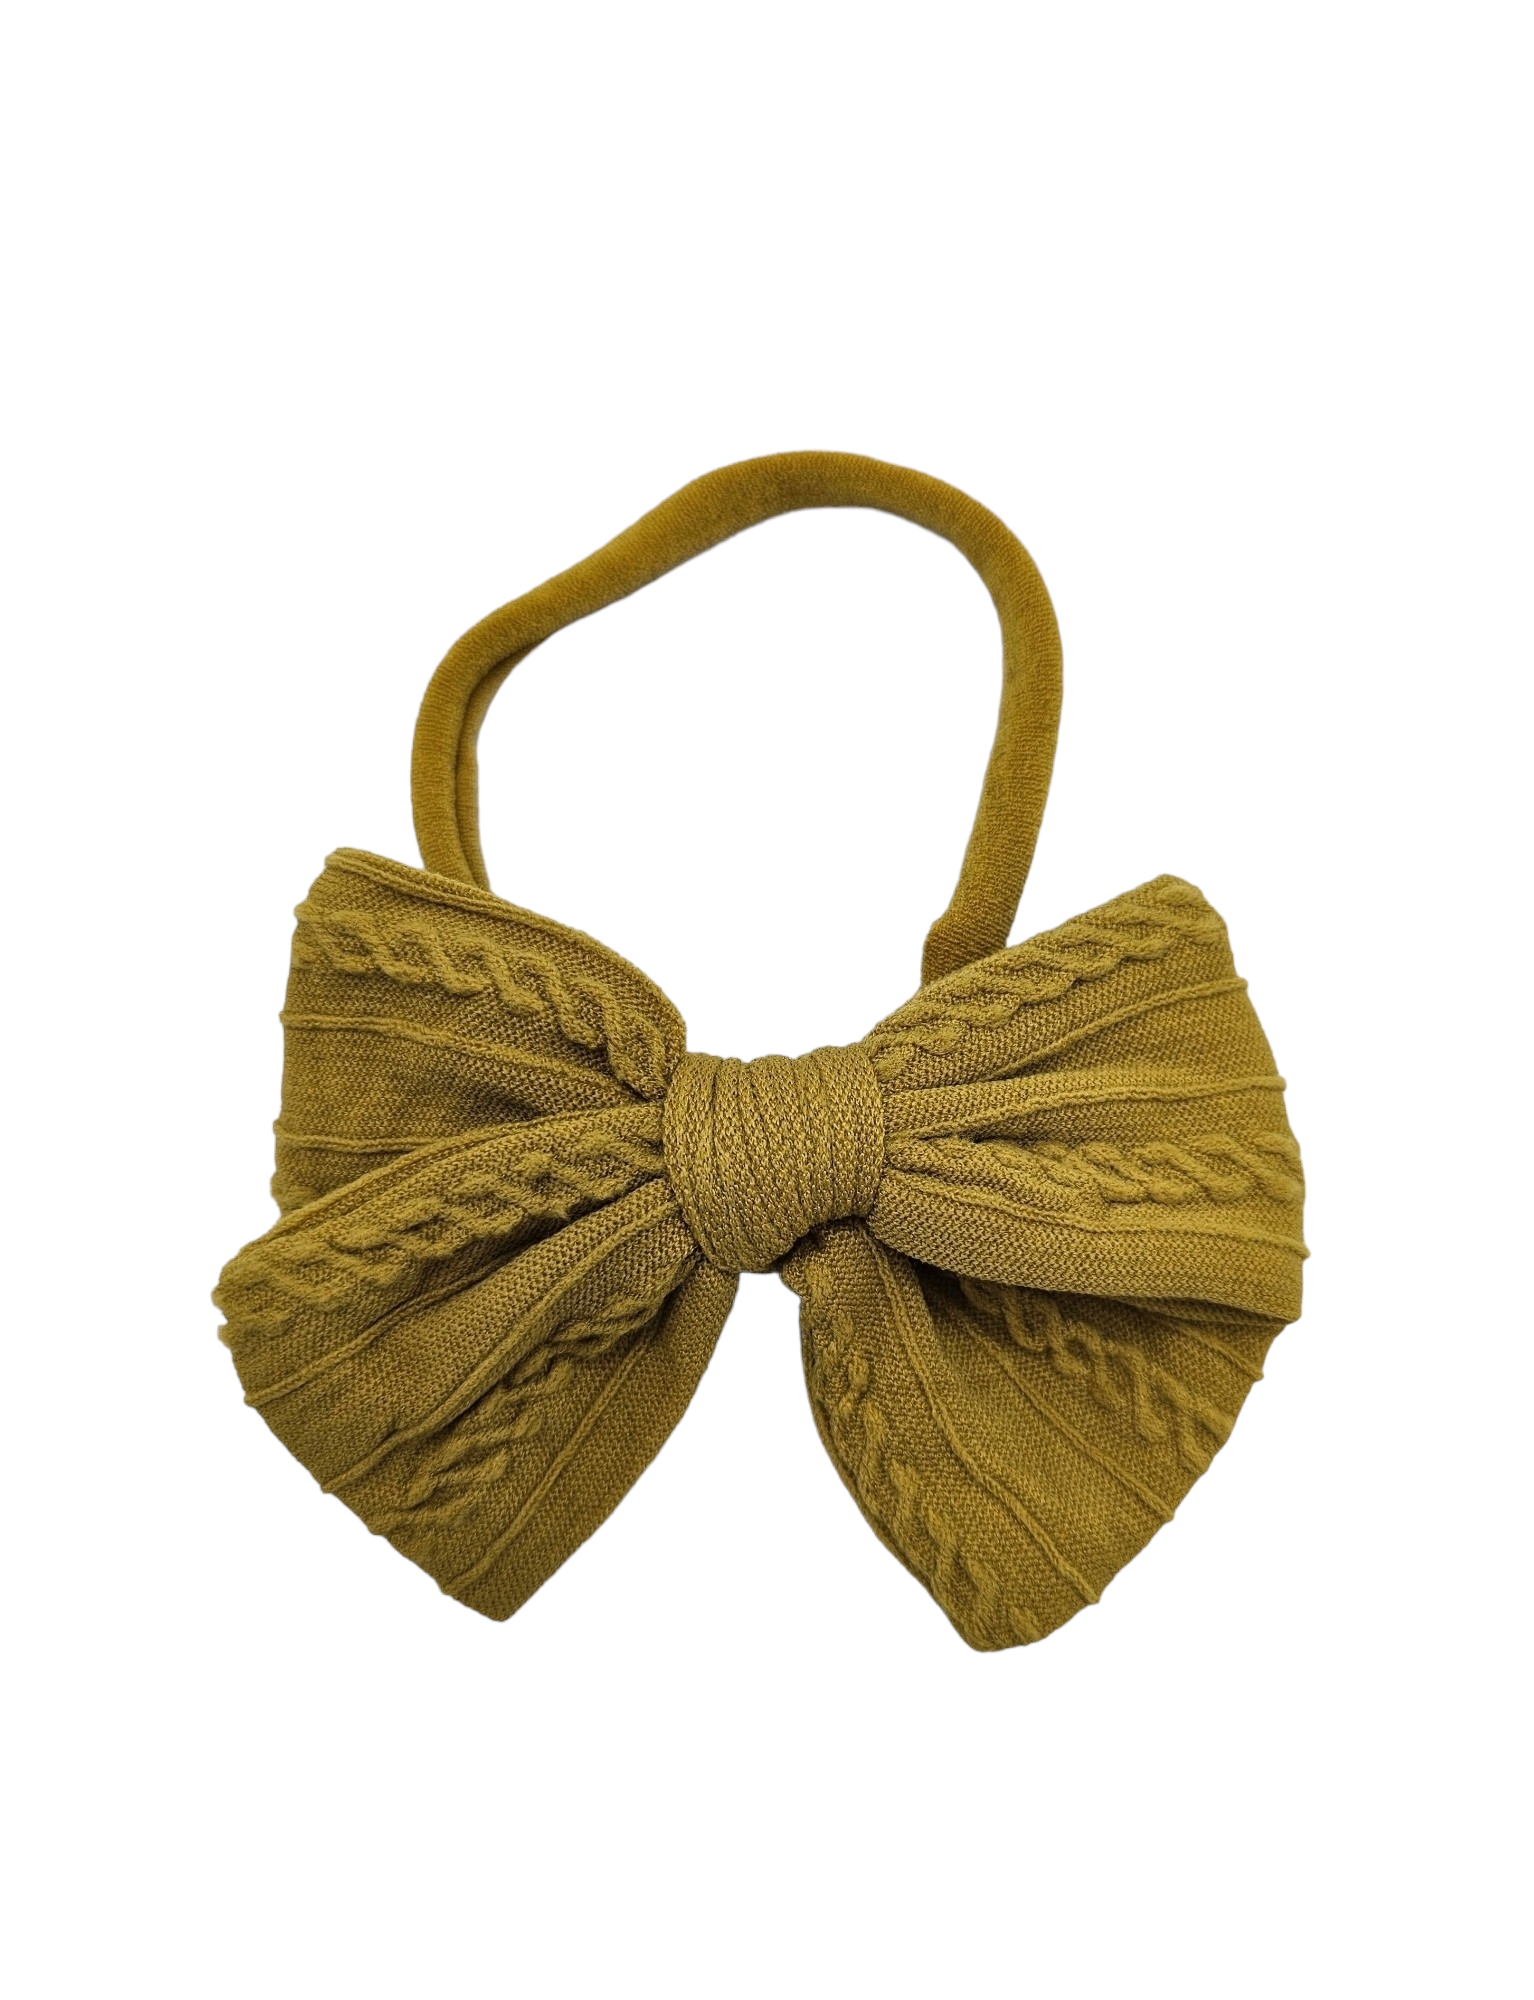 Mustard Yellow 3.5 Inch Cable Knit Dainty Bow Headband - Betty Brown Boutique Ltd